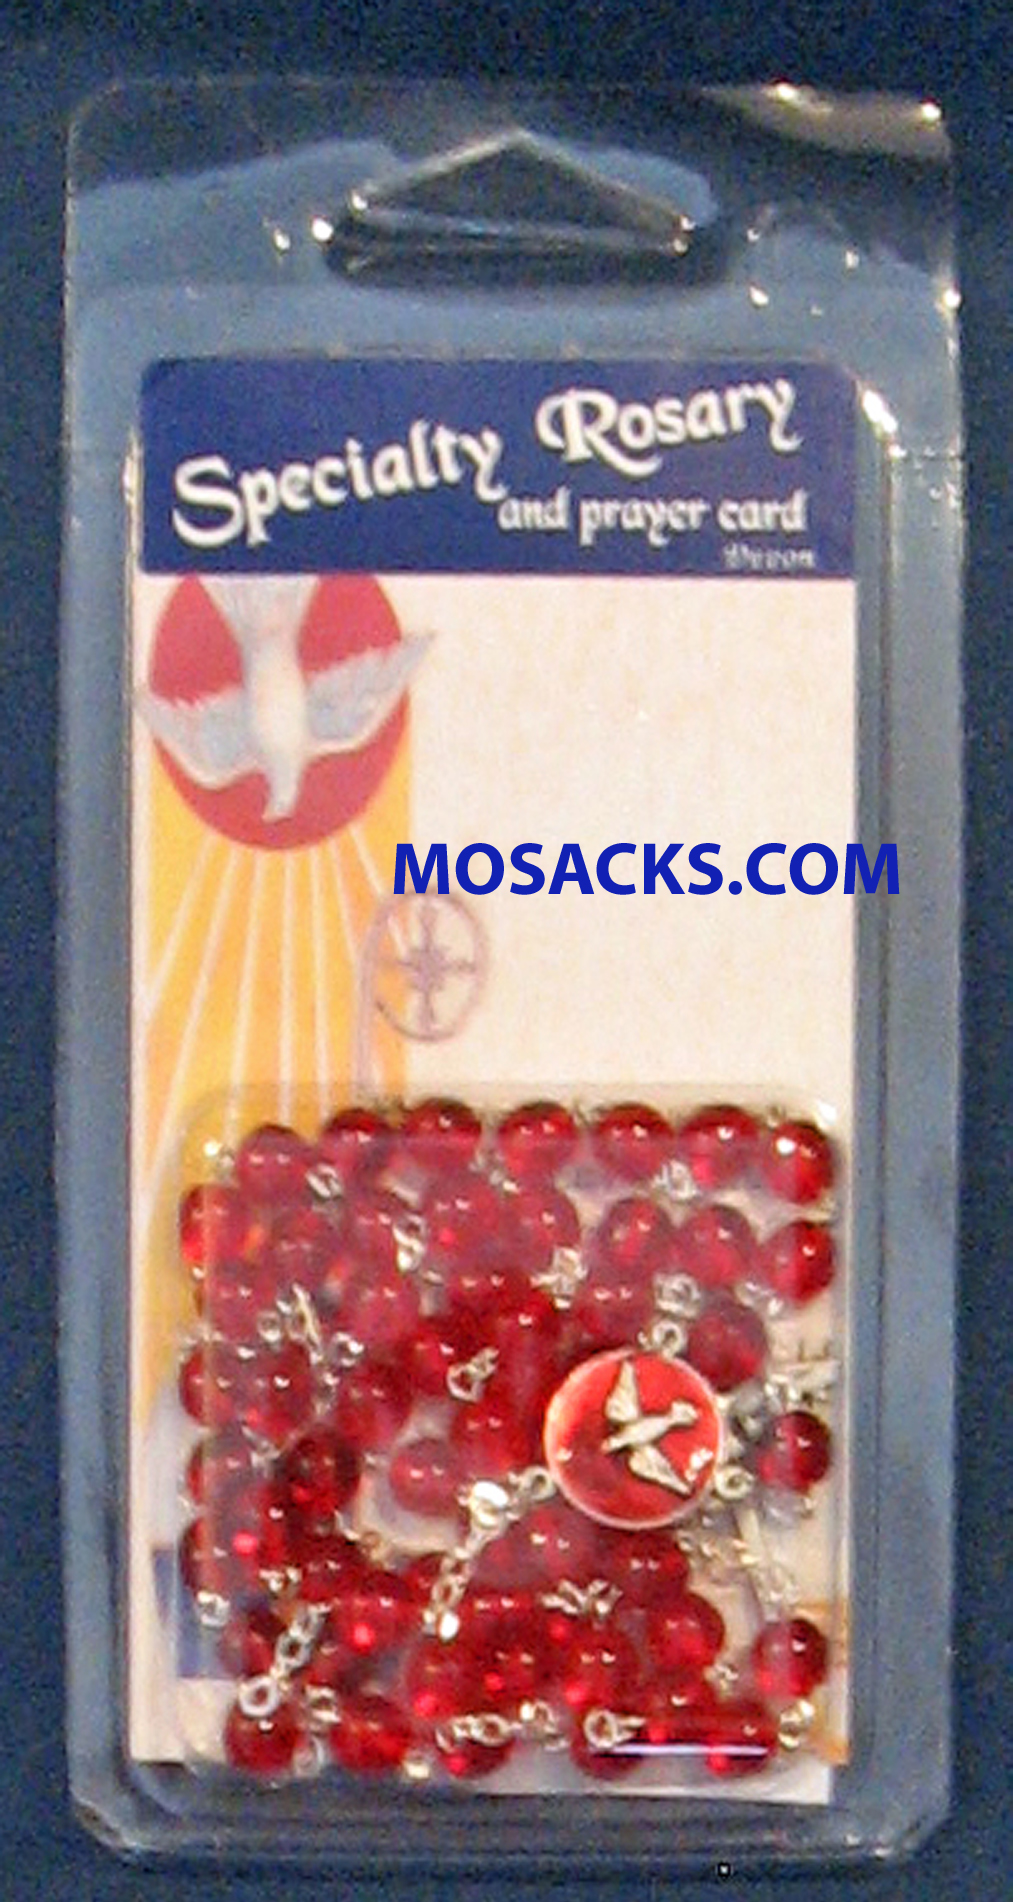 Specialty Rosary Holy Spirit Red Rosary/Confirmation Red Rosary and Prayer Card 64-05287